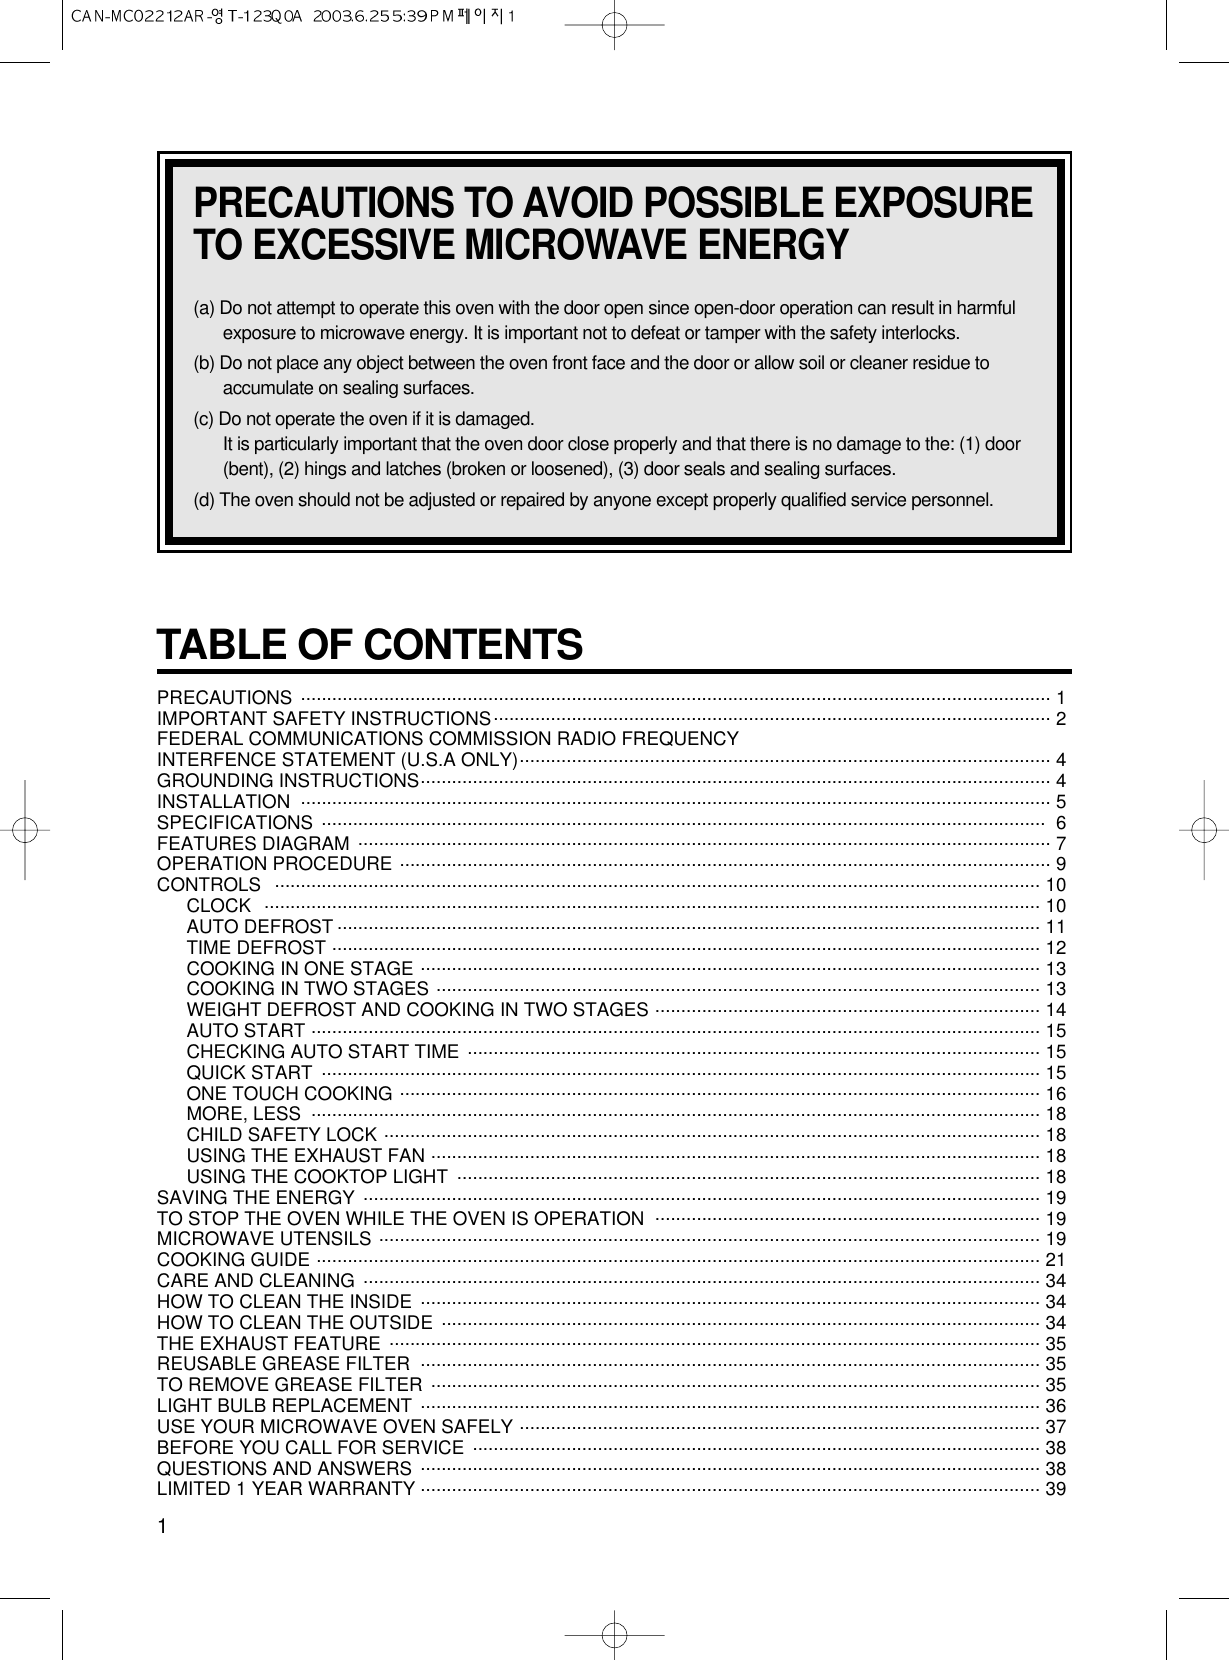 TABLE OF CONTENTS PRECAUTIONS  ................................................................................................................................................ 1 IMPORTANT SAFETY INSTRUCTIONS........................................................................................................... 2FEDERAL COMMUNICATIONS COMMISSION RADIO FREQUENCY  INTERFENCE STATEMENT (U.S.A ONLY)...................................................................................................... 4GROUNDING INSTRUCTIONS......................................................................................................................... 4INSTALLATION ................................................................................................................................................ 5SPECIFICATIONS ........................................................................................................................................... 6FEATURES DIAGRAM ..................................................................................................................................... 7OPERATION PROCEDURE ............................................................................................................................. 9CONTROLS ................................................................................................................................................... 10CLOCK ..................................................................................................................................................... 10AUTO DEFROST ....................................................................................................................................... 11TIME DEFROST ........................................................................................................................................ 12COOKING IN ONE STAGE ....................................................................................................................... 13COOKING IN TWO STAGES .................................................................................................................... 13WEIGHT DEFROST AND COOKING IN TWO STAGES .......................................................................... 14AUTO START ............................................................................................................................................ 15CHECKING AUTO START TIME .............................................................................................................. 15QUICK START  .......................................................................................................................................... 15ONE TOUCH COOKING ........................................................................................................................... 16MORE, LESS  ............................................................................................................................................ 18CHILD SAFETY LOCK .............................................................................................................................. 18USING THE EXHAUST FAN ..................................................................................................................... 18USING THE COOKTOP LIGHT ................................................................................................................ 18SAVING THE ENERGY .................................................................................................................................. 19TO STOP THE OVEN WHILE THE OVEN IS OPERATION .......................................................................... 19MICROWAVE UTENSILS ............................................................................................................................... 19COOKING GUIDE ........................................................................................................................................... 21CARE AND CLEANING .................................................................................................................................. 34HOW TO CLEAN THE INSIDE ....................................................................................................................... 34HOW TO CLEAN THE OUTSIDE ................................................................................................................... 34THE EXHAUST FEATURE ............................................................................................................................. 35REUSABLE GREASE FILTER ....................................................................................................................... 35TO REMOVE GREASE FILTER ..................................................................................................................... 35LIGHT BULB REPLACEMENT ....................................................................................................................... 36USE YOUR MICROWAVE OVEN SAFELY .................................................................................................... 37BEFORE YOU CALL FOR SERVICE ............................................................................................................. 38QUESTIONS AND ANSWERS ....................................................................................................................... 38LIMITED 1 YEAR WARRANTY ....................................................................................................................... 391PRECAUTIONS TO AVOID POSSIBLE EXPOSURETO EXCESSIVE MICROWAVE ENERGY(a) Do not attempt to operate this oven with the door open since open-door operation can result in harmfulexposure to microwave energy. It is important not to defeat or tamper with the safety interlocks.(b) Do not place any object between the oven front face and the door or allow soil or cleaner residue toaccumulate on sealing surfaces.(c) Do not operate the oven if it is damaged.It is particularly important that the oven door close properly and that there is no damage to the: (1) door(bent), (2) hings and latches (broken or loosened), (3) door seals and sealing surfaces.(d) The oven should not be adjusted or repaired by anyone except properly qualified service personnel.